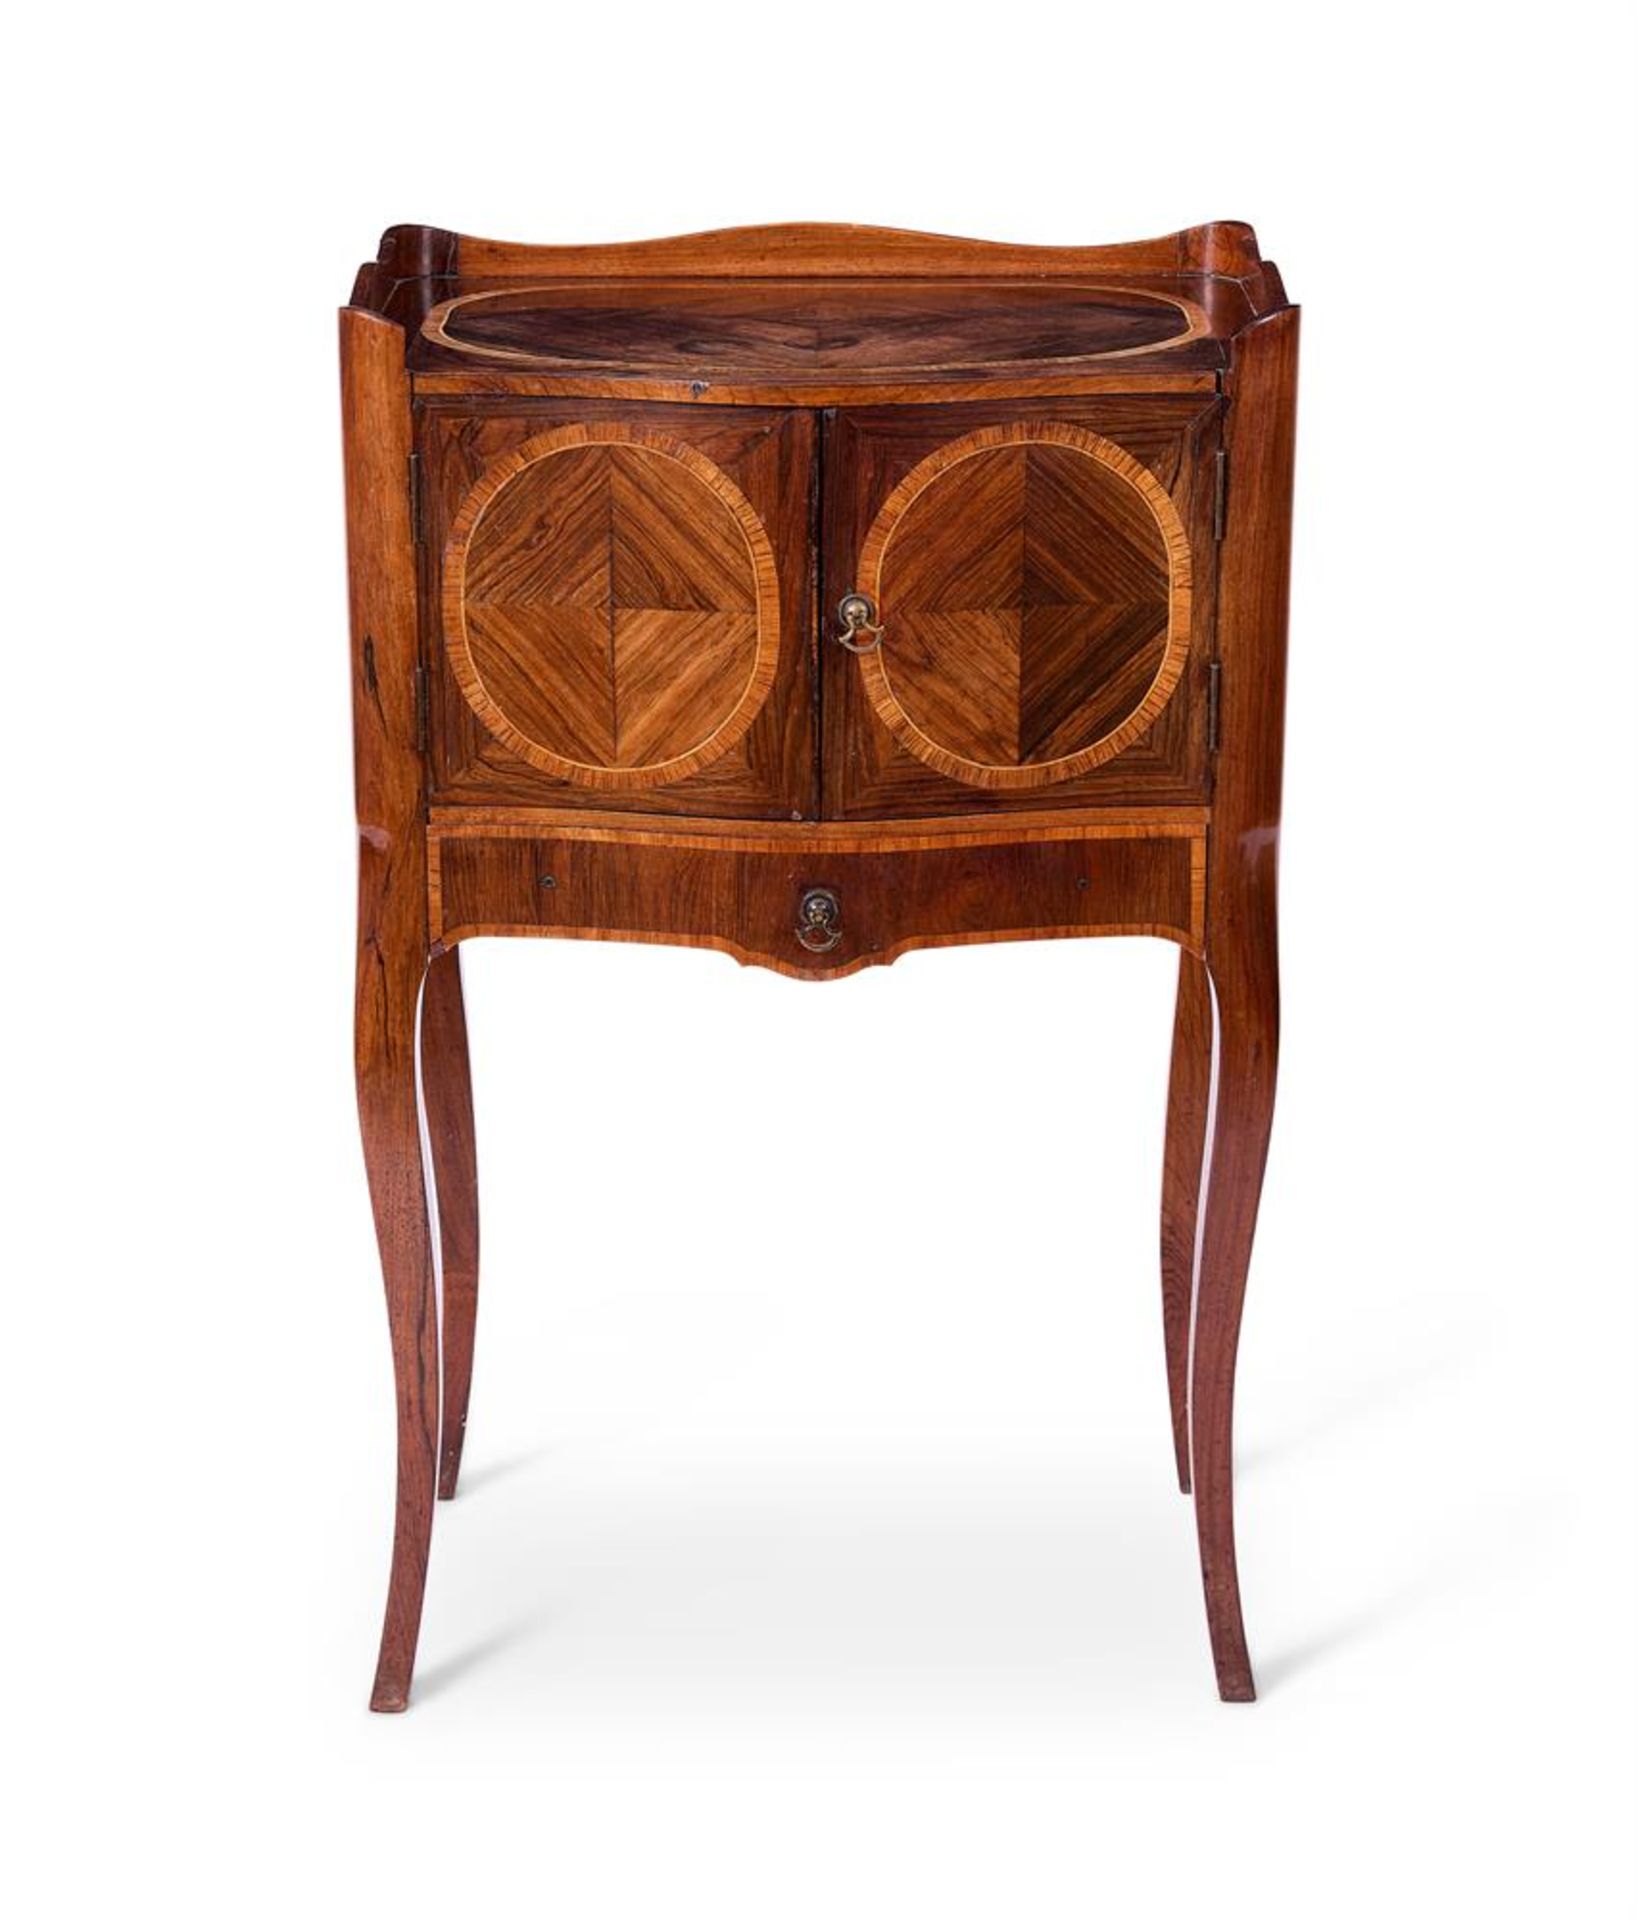 Y A KINGWOOD SERPENTINE BEDSIDE CABINET OF LOUIS XVI STYLE - Image 2 of 2